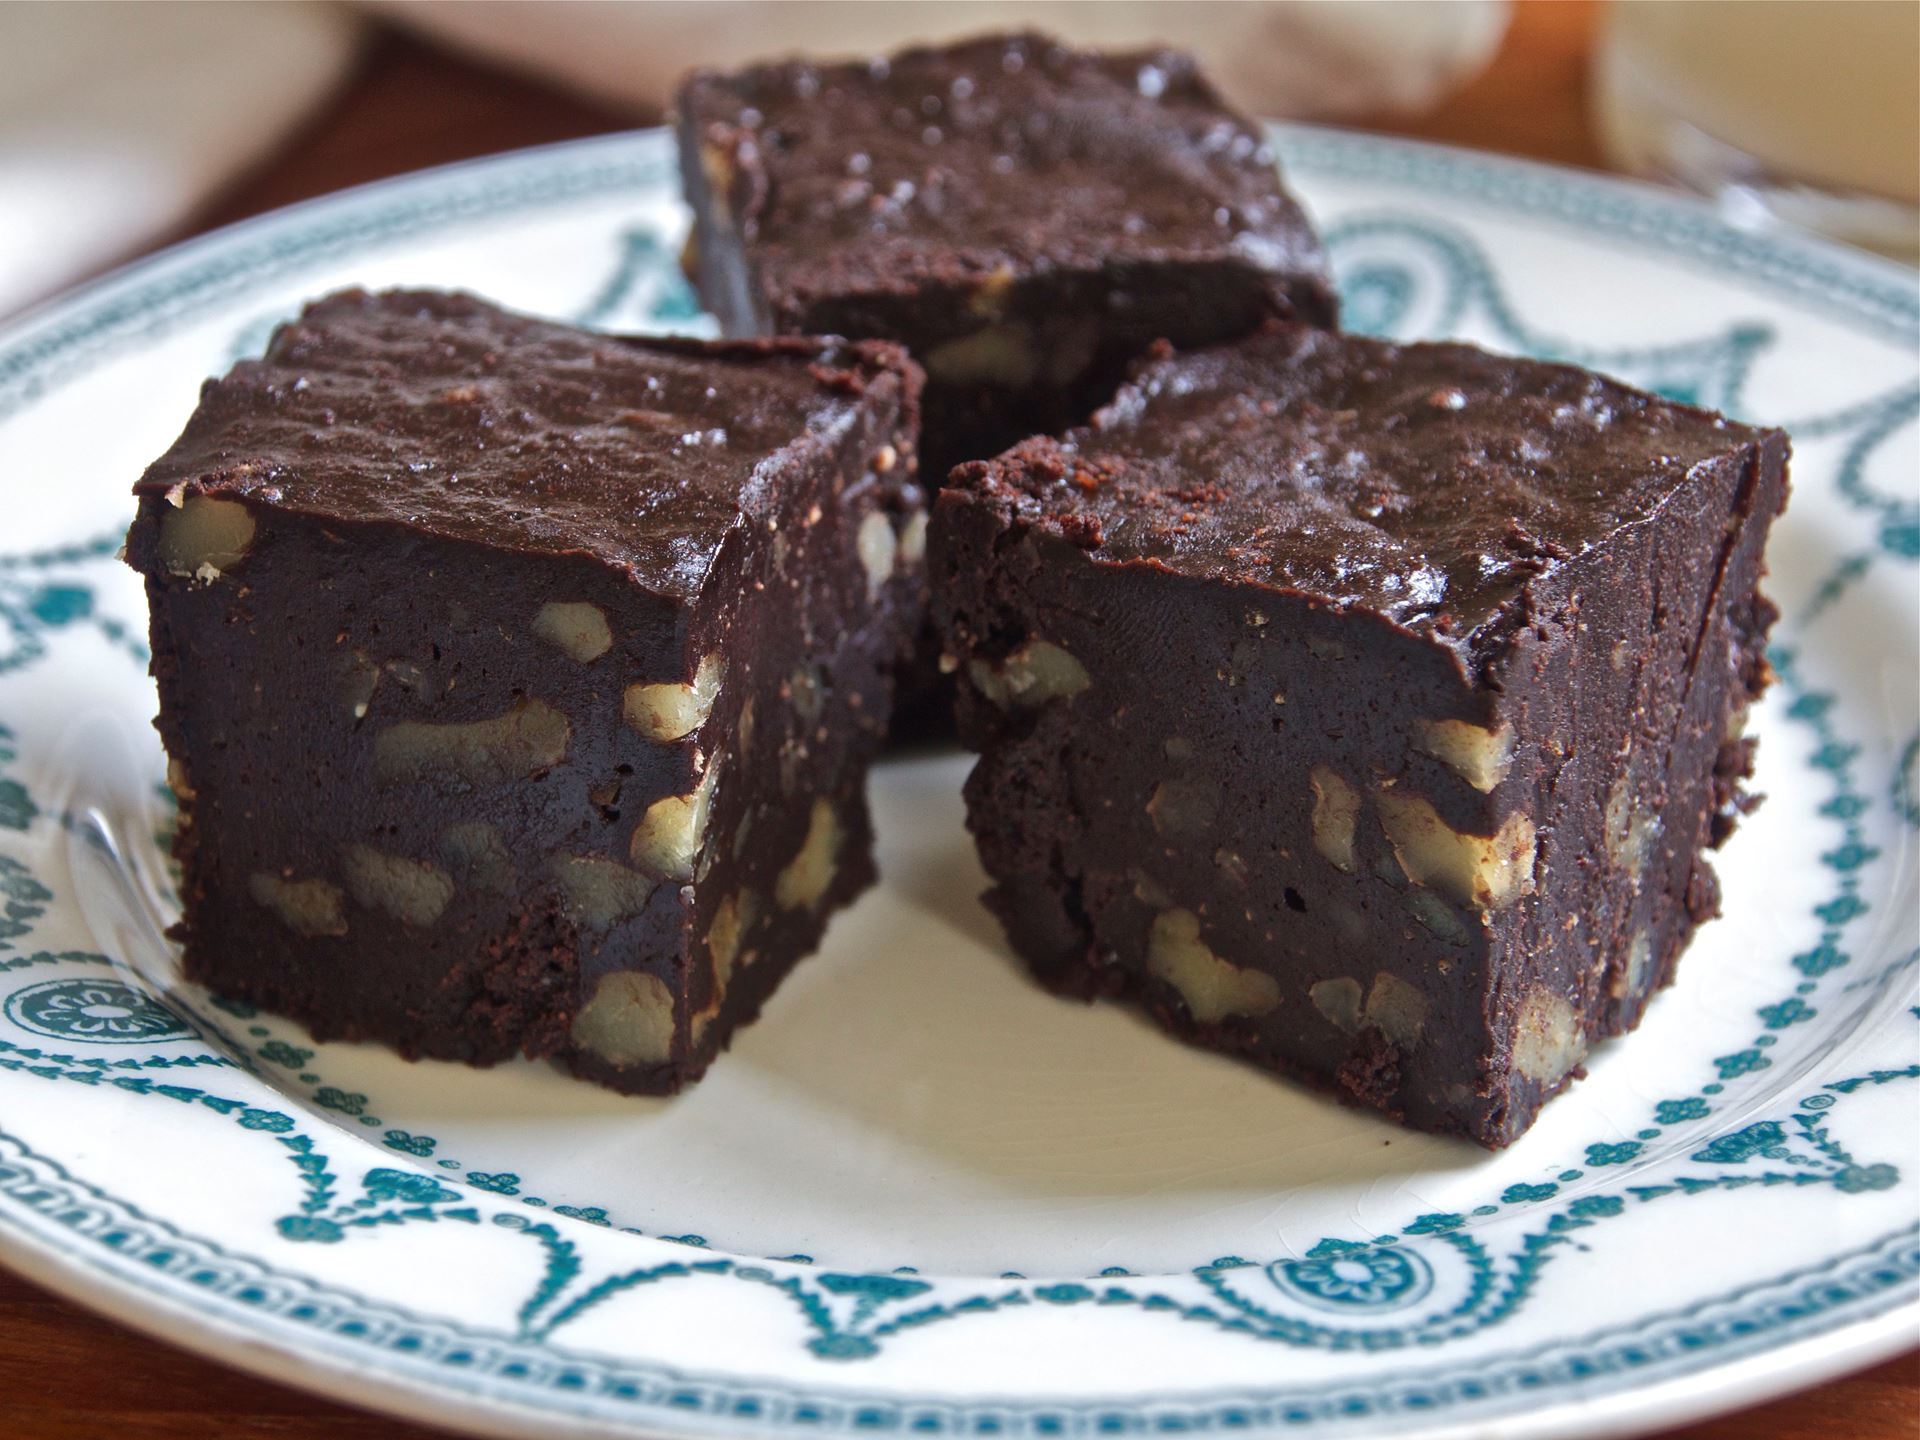 Picture of Fudge Brownies with Crispy Walnuts (Gluten-free) -- 11 oz by weight